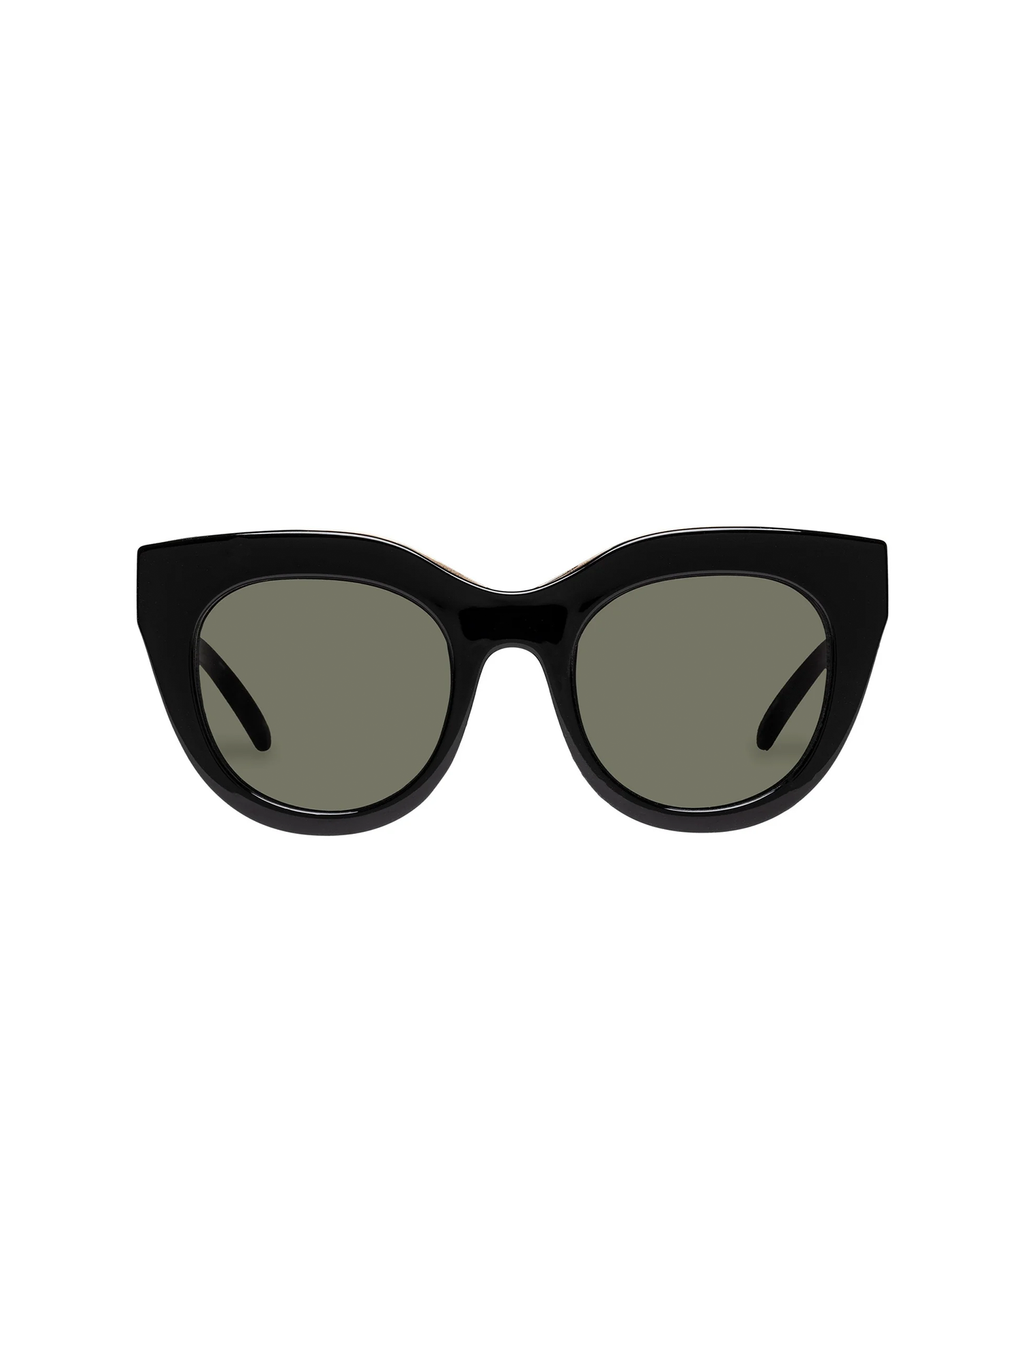 Air Heart Sunnies in Black/Gold - Stitch And Feather